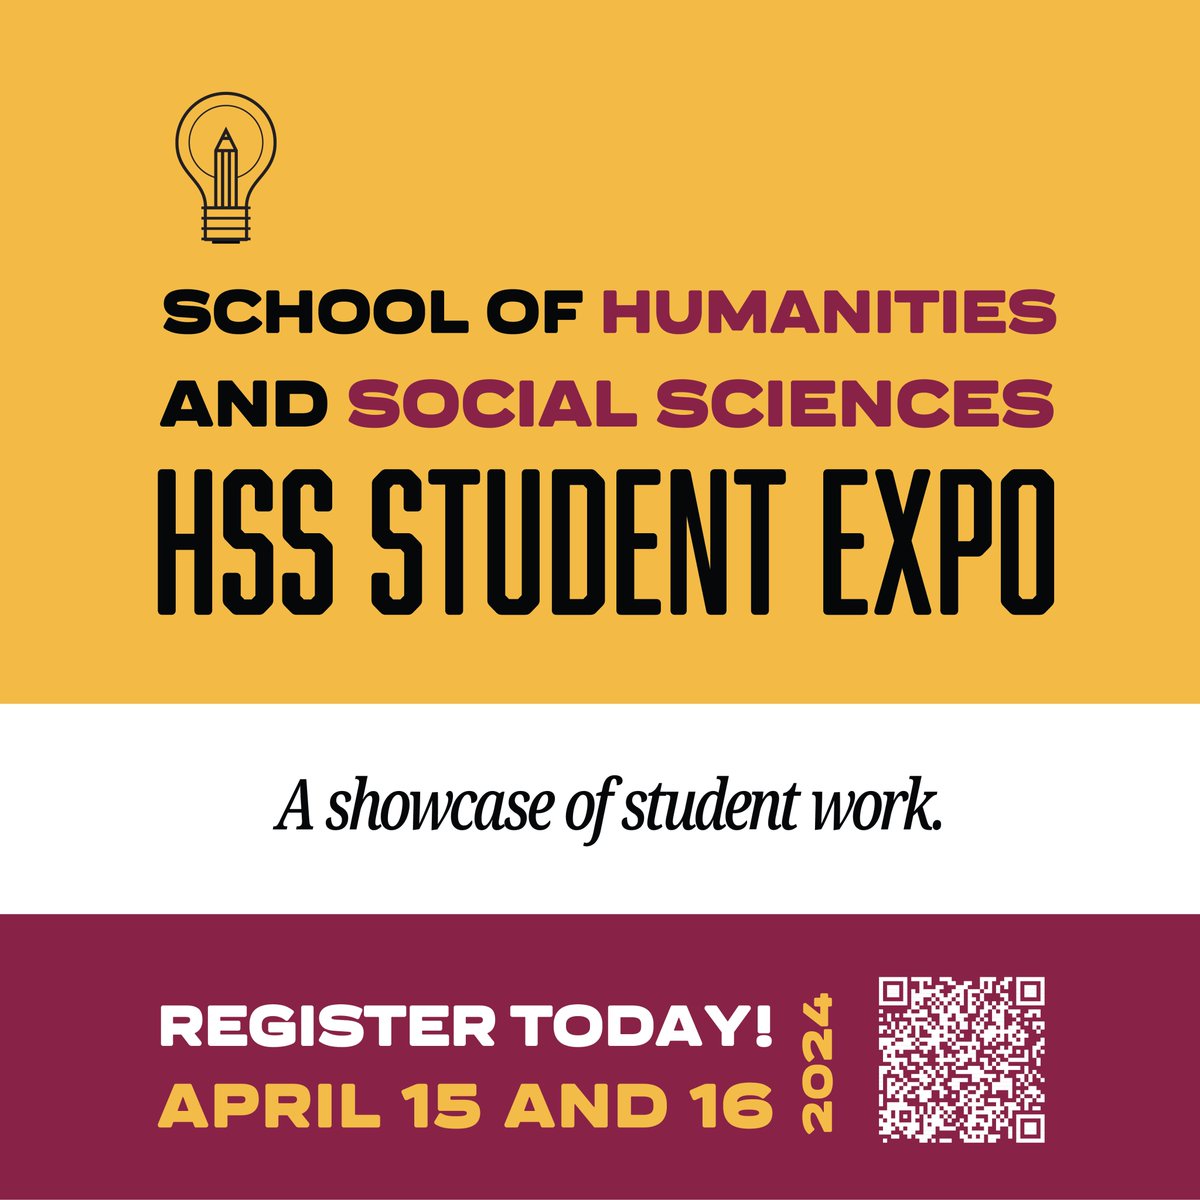 Join us in person or online as HSS students present their research. Check out the program and come cheer them on! brooklyn.edu/hss/student-ex… @bcthinkers @bklyncollege411 @bchistorydept @philosophy_bc @BC_AfricanaDept @ClassicsBc @BC_PRLS